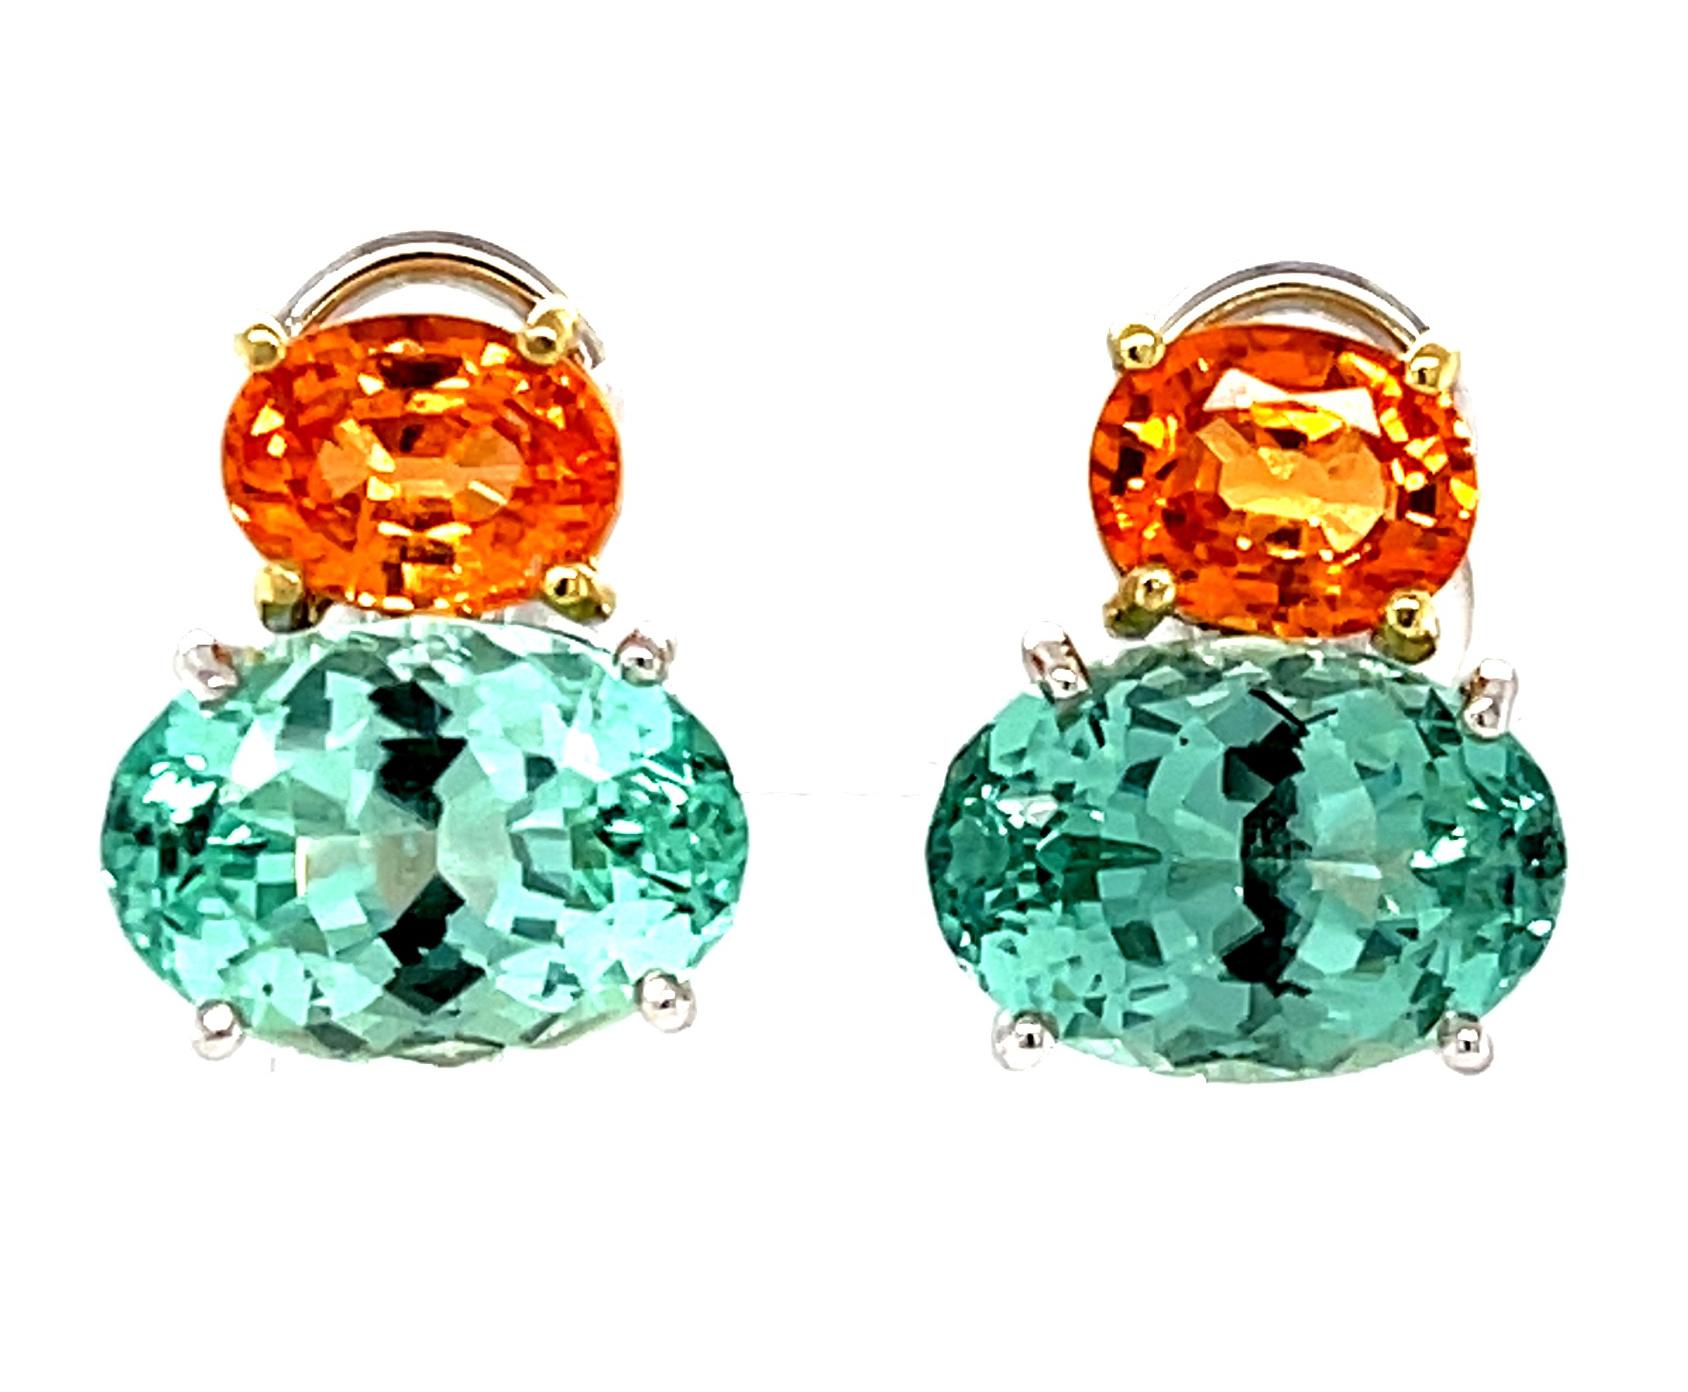 A chic pairing of color is displayed by this lovely pair of earrings. Bright, Mandarin-orange spessartite garnets are combined with sea foam green tourmalines to form a retro-inspired color block. Handmade in 18k white and yellow gold by our Master